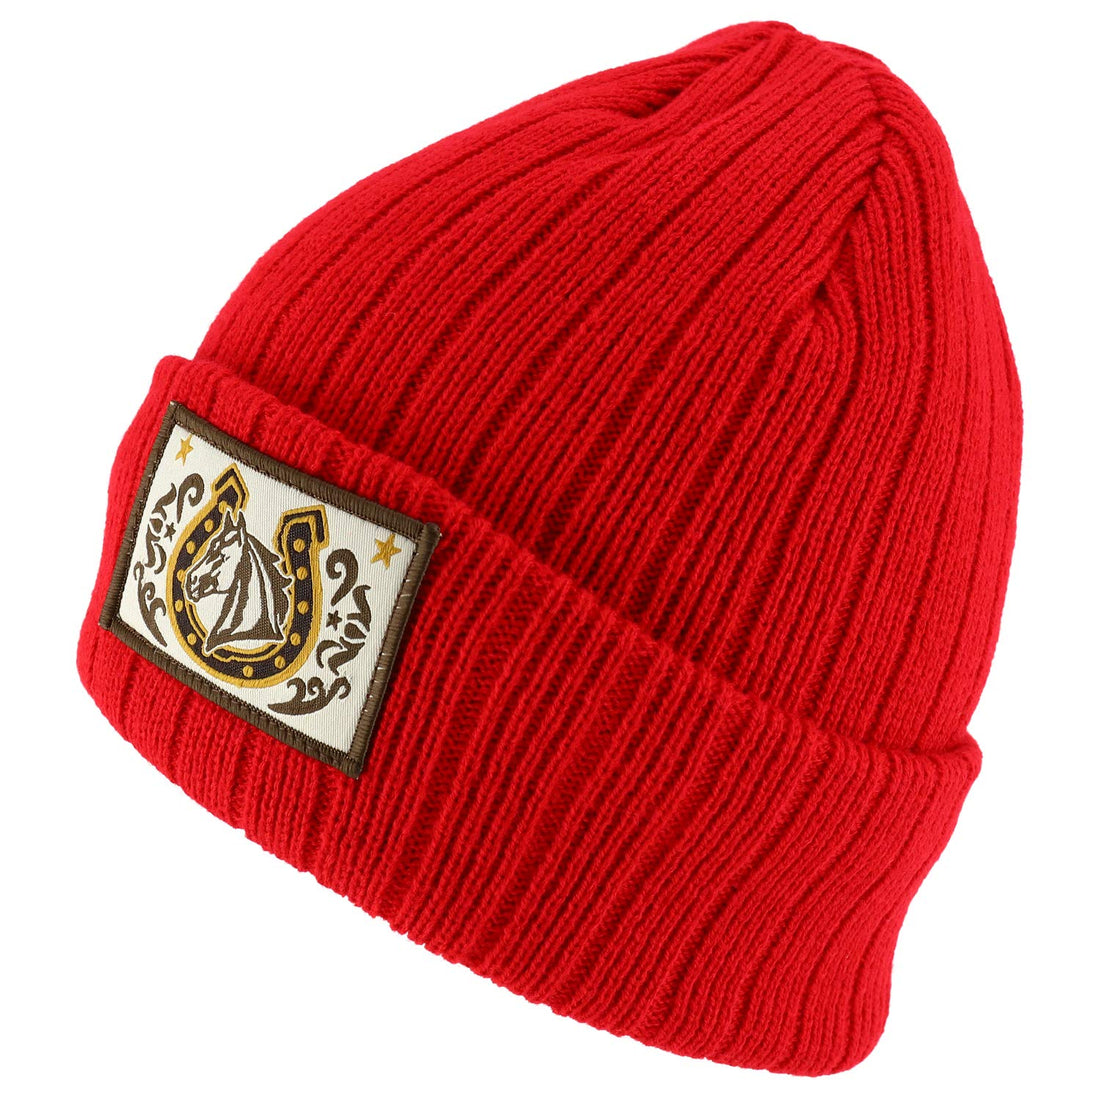 Trendy Apparel Shop Horse Patch Embroidered Outdoor Long Cuff Winter Beanie